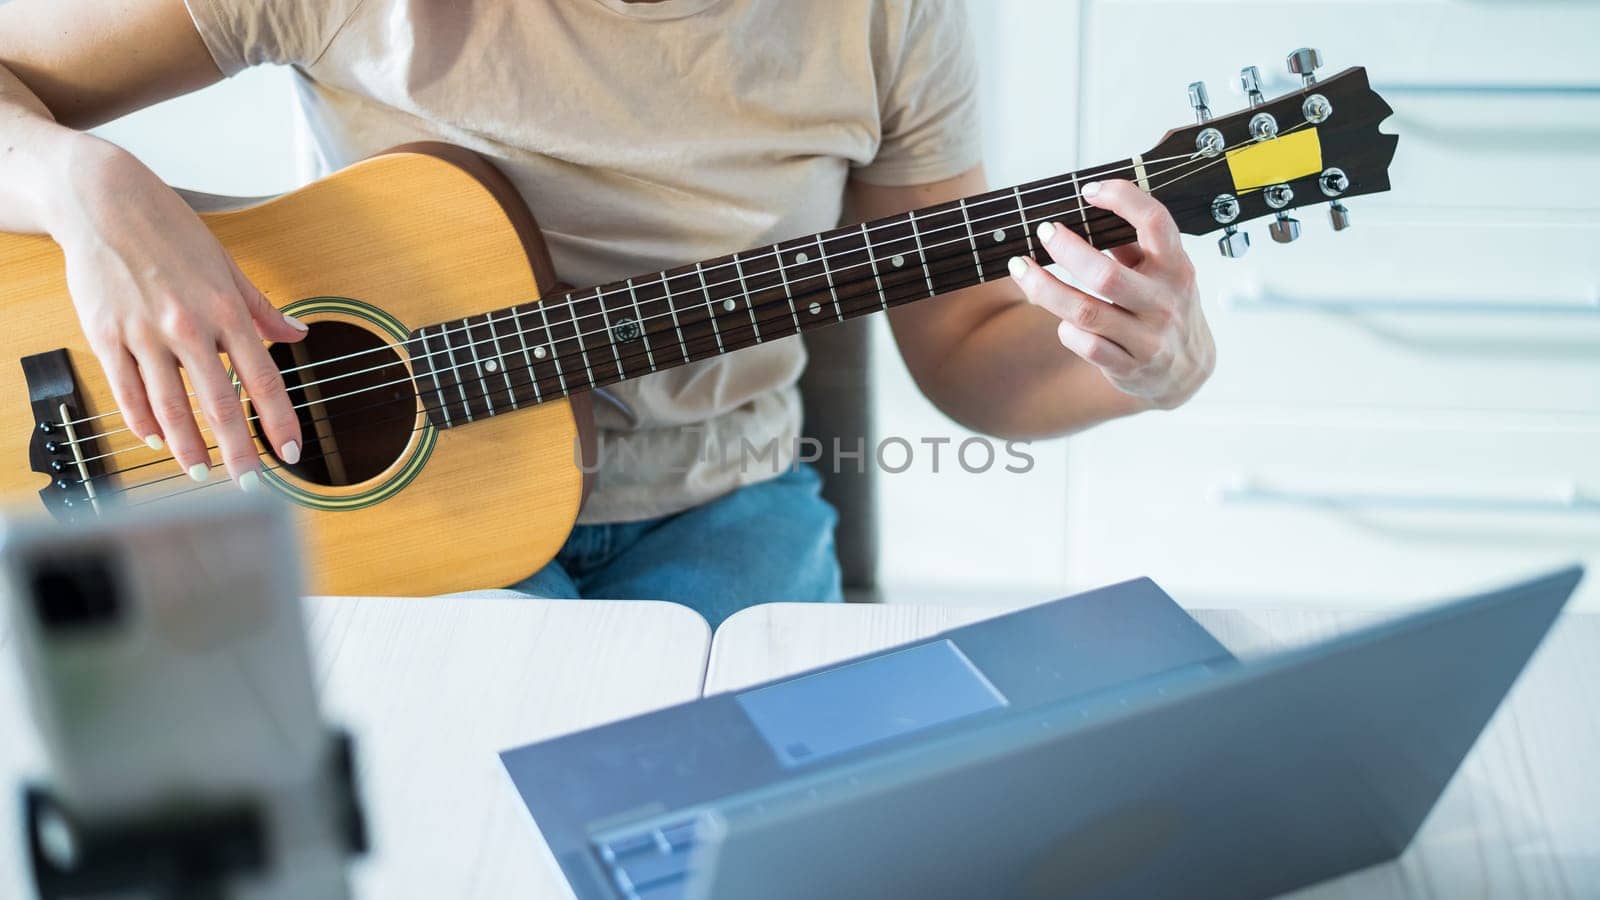 A woman sits in the kitchen during a remote acoustic guitar lesson. A girl learns to play the guitar and watches educational videos on a laptop by mrwed54